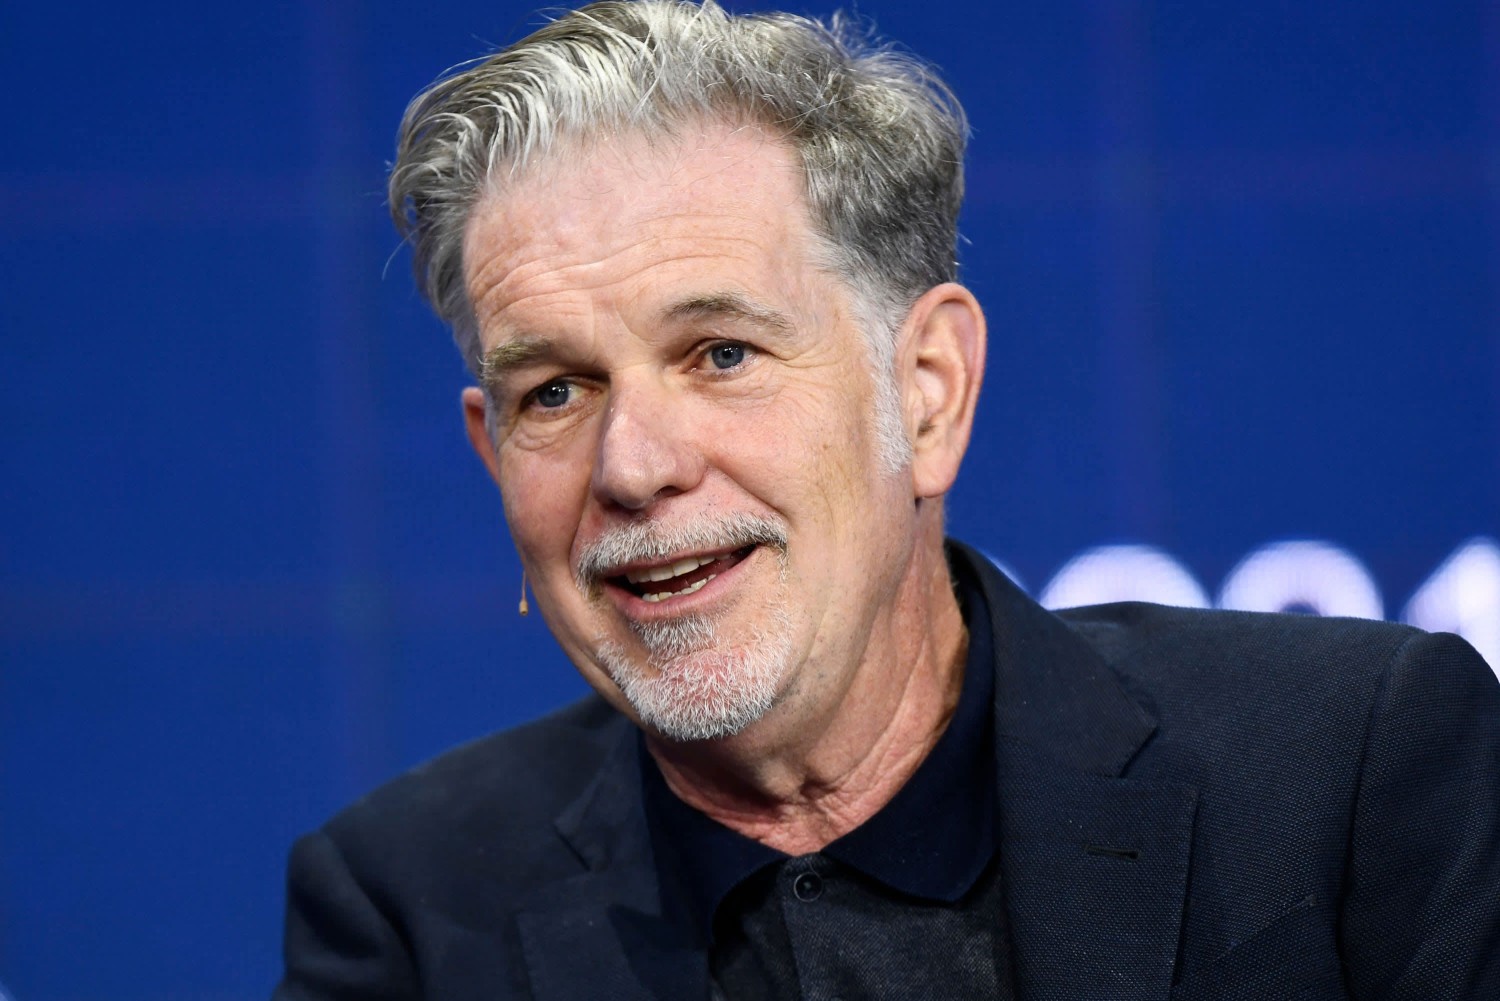 Reed Hastings, co-CEO of Netflix, participates in the Milken Institute Global Conference on October 18, 2021 in Beverly Hills, California. Patrick T. Fallon | AFP | Getty Images